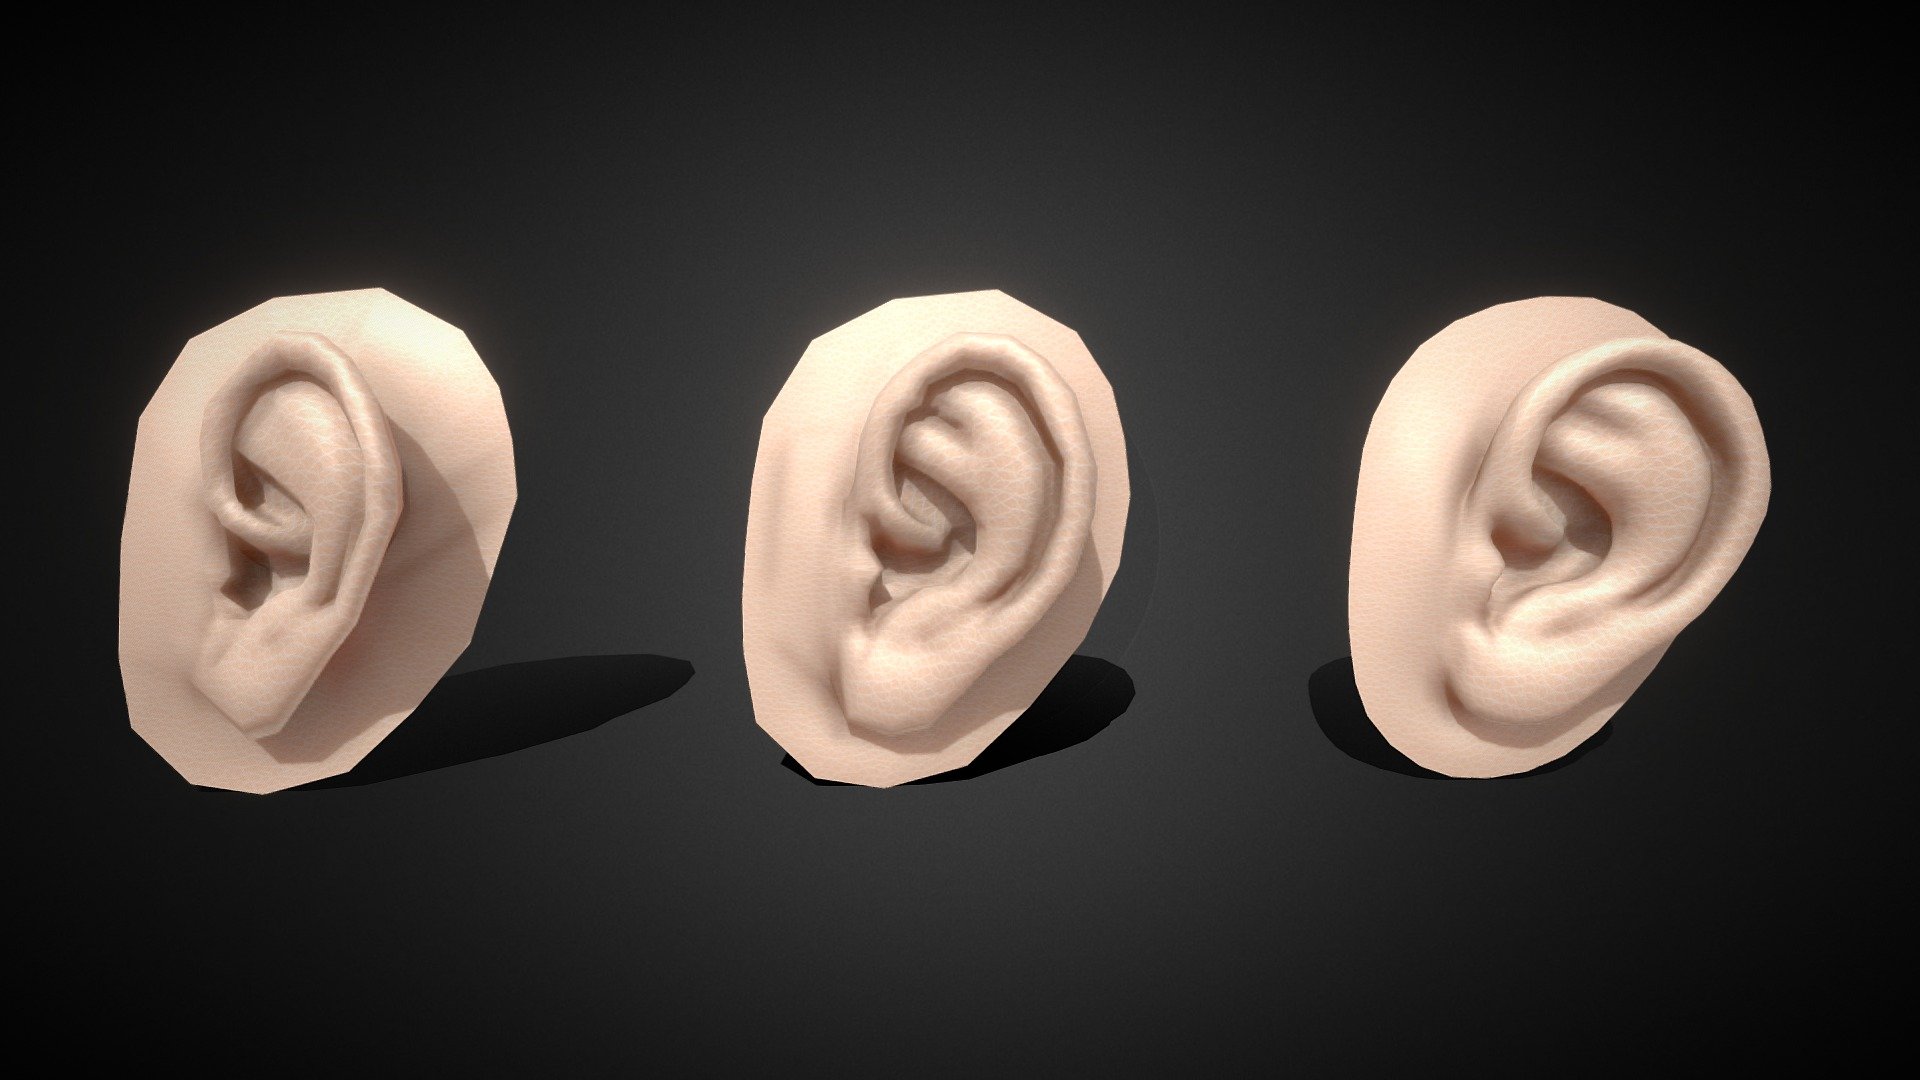 Ear Base mesh with LOD shapes for free download,
This Ear Base mesh with LOD shapes have 3 types of variation of meshes.

Uploaded Size 4.5M
Image formats jpg(7)
Download size- 7MB
Geometry
Triangles 7
Quads 2.9k
Total triangles 5.7k
Vertices
2.9k
PBR No 
Textures 4
Materials 1
UV Layers Yes
Vertex colors No
Animations 0
Rigged geometries No
Morph geometries 0
Scale transformations No - Ear Base mesh with LOD shapes - Buy Royalty Free 3D model by srikanthsamba 3d model